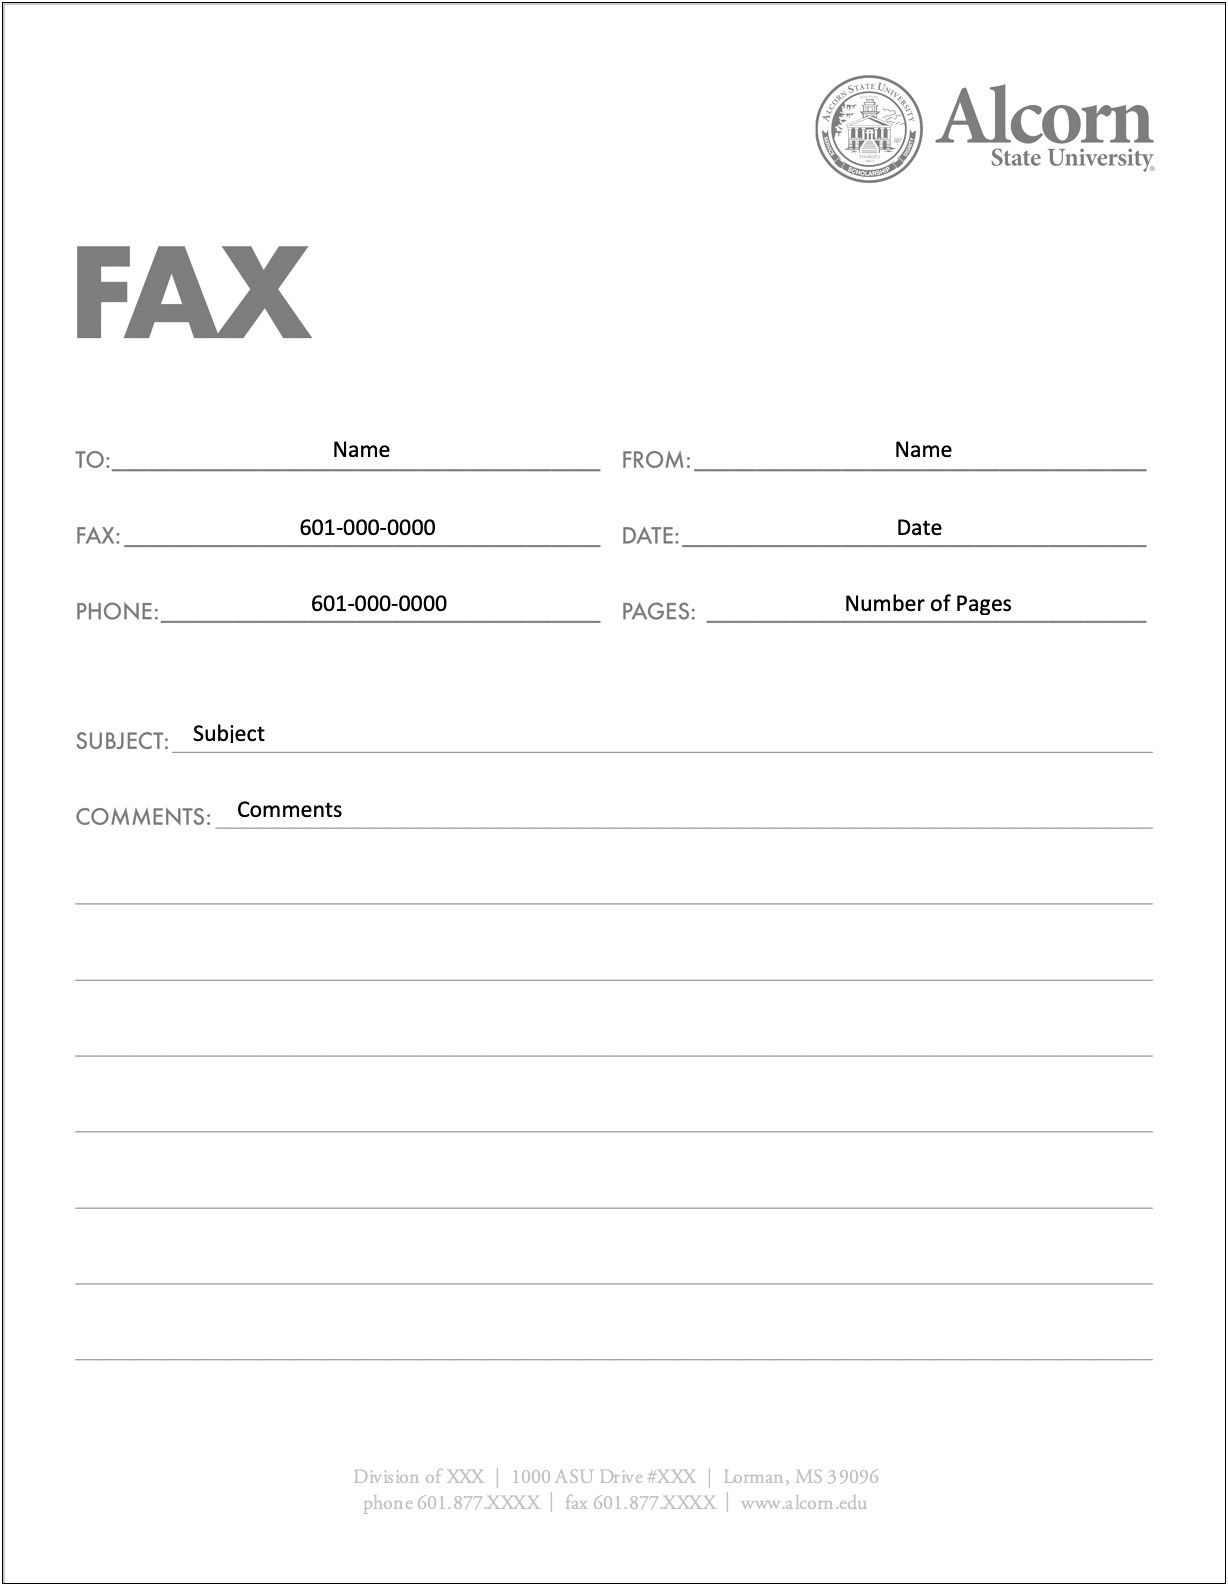 Fax Cover Sheet Template Word With Hearts